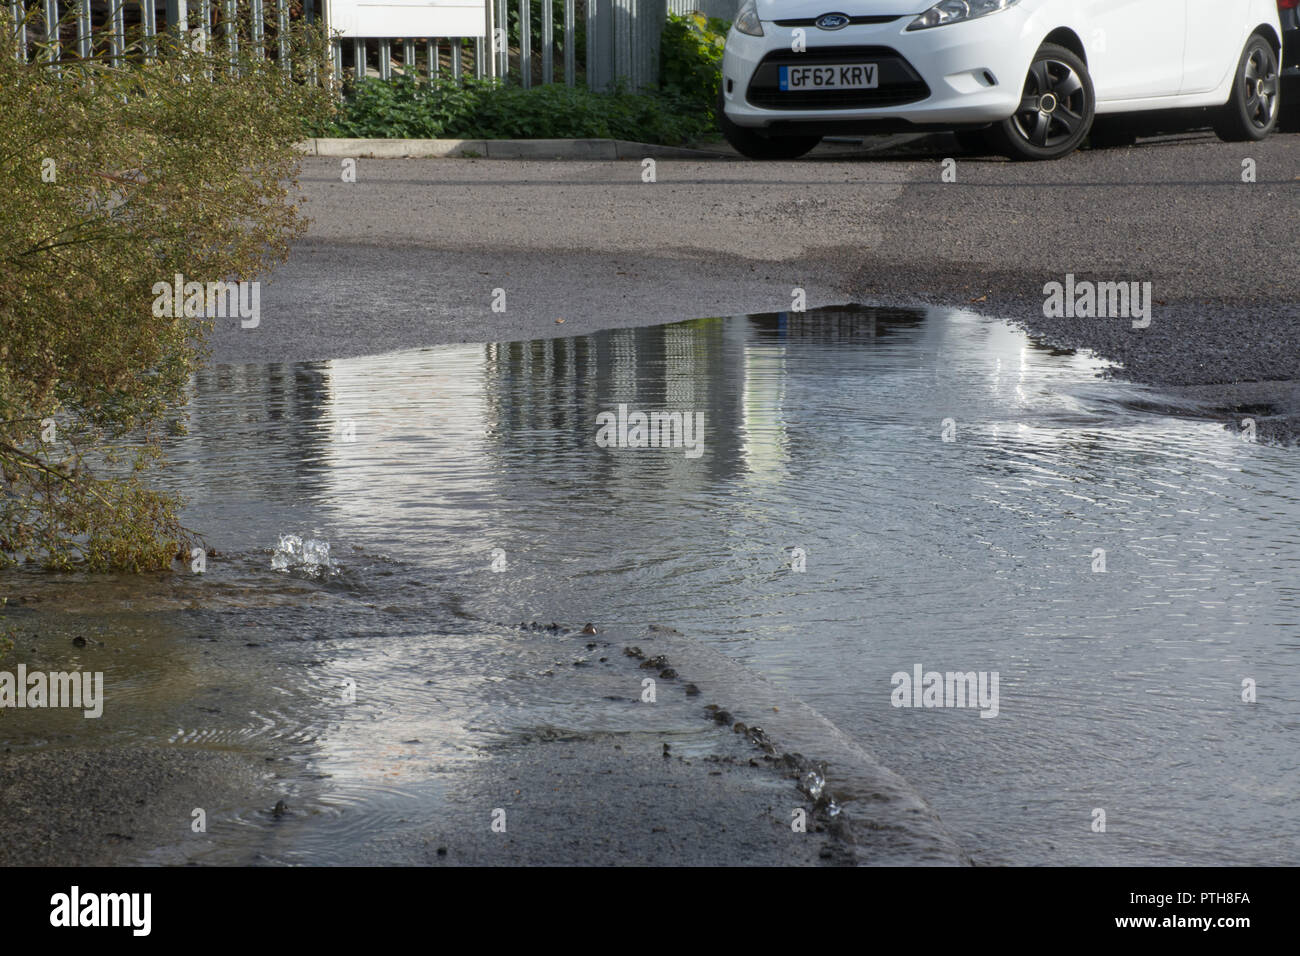 Burst water main leaking water onto road and pavement causing a flood Stock Photo